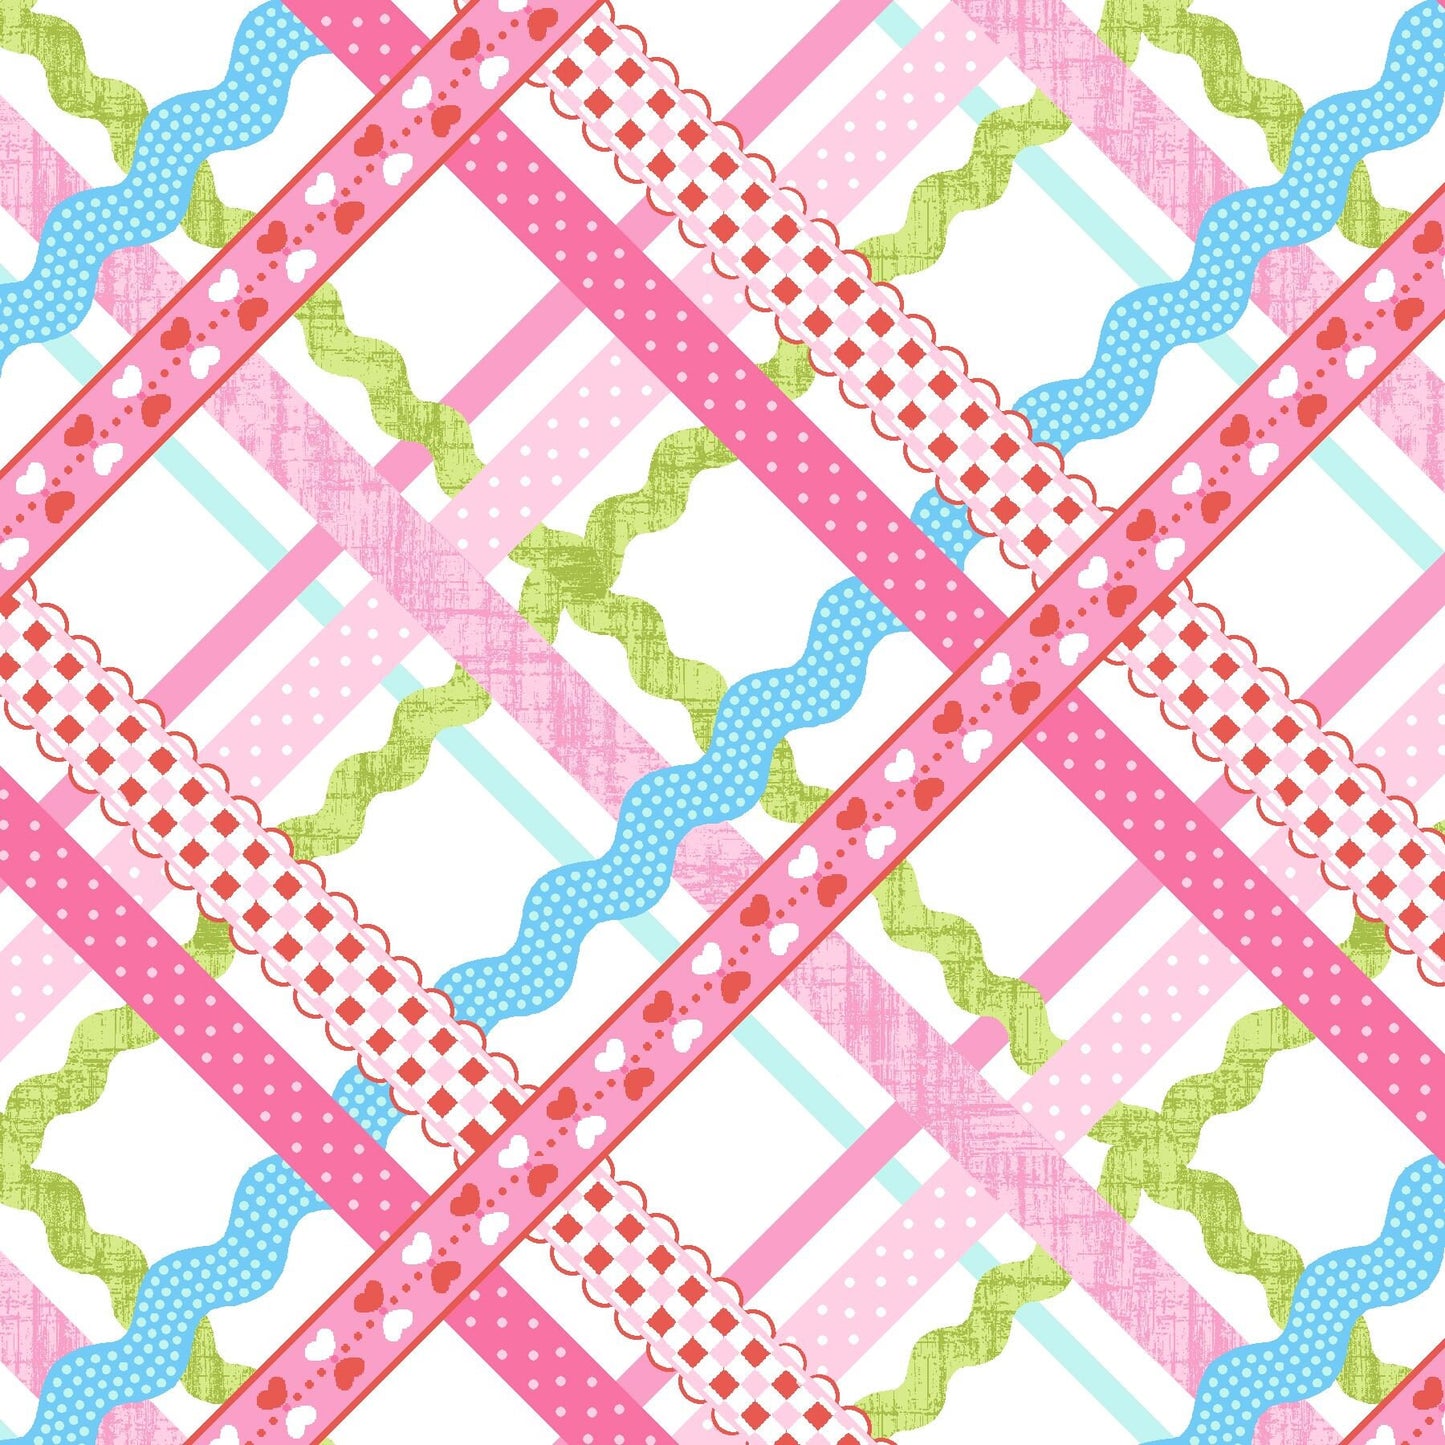 Sew Kind by Stitches by Charlotte Rick Rack Plaid Pink 5226-22 Cotton Woven Fabric